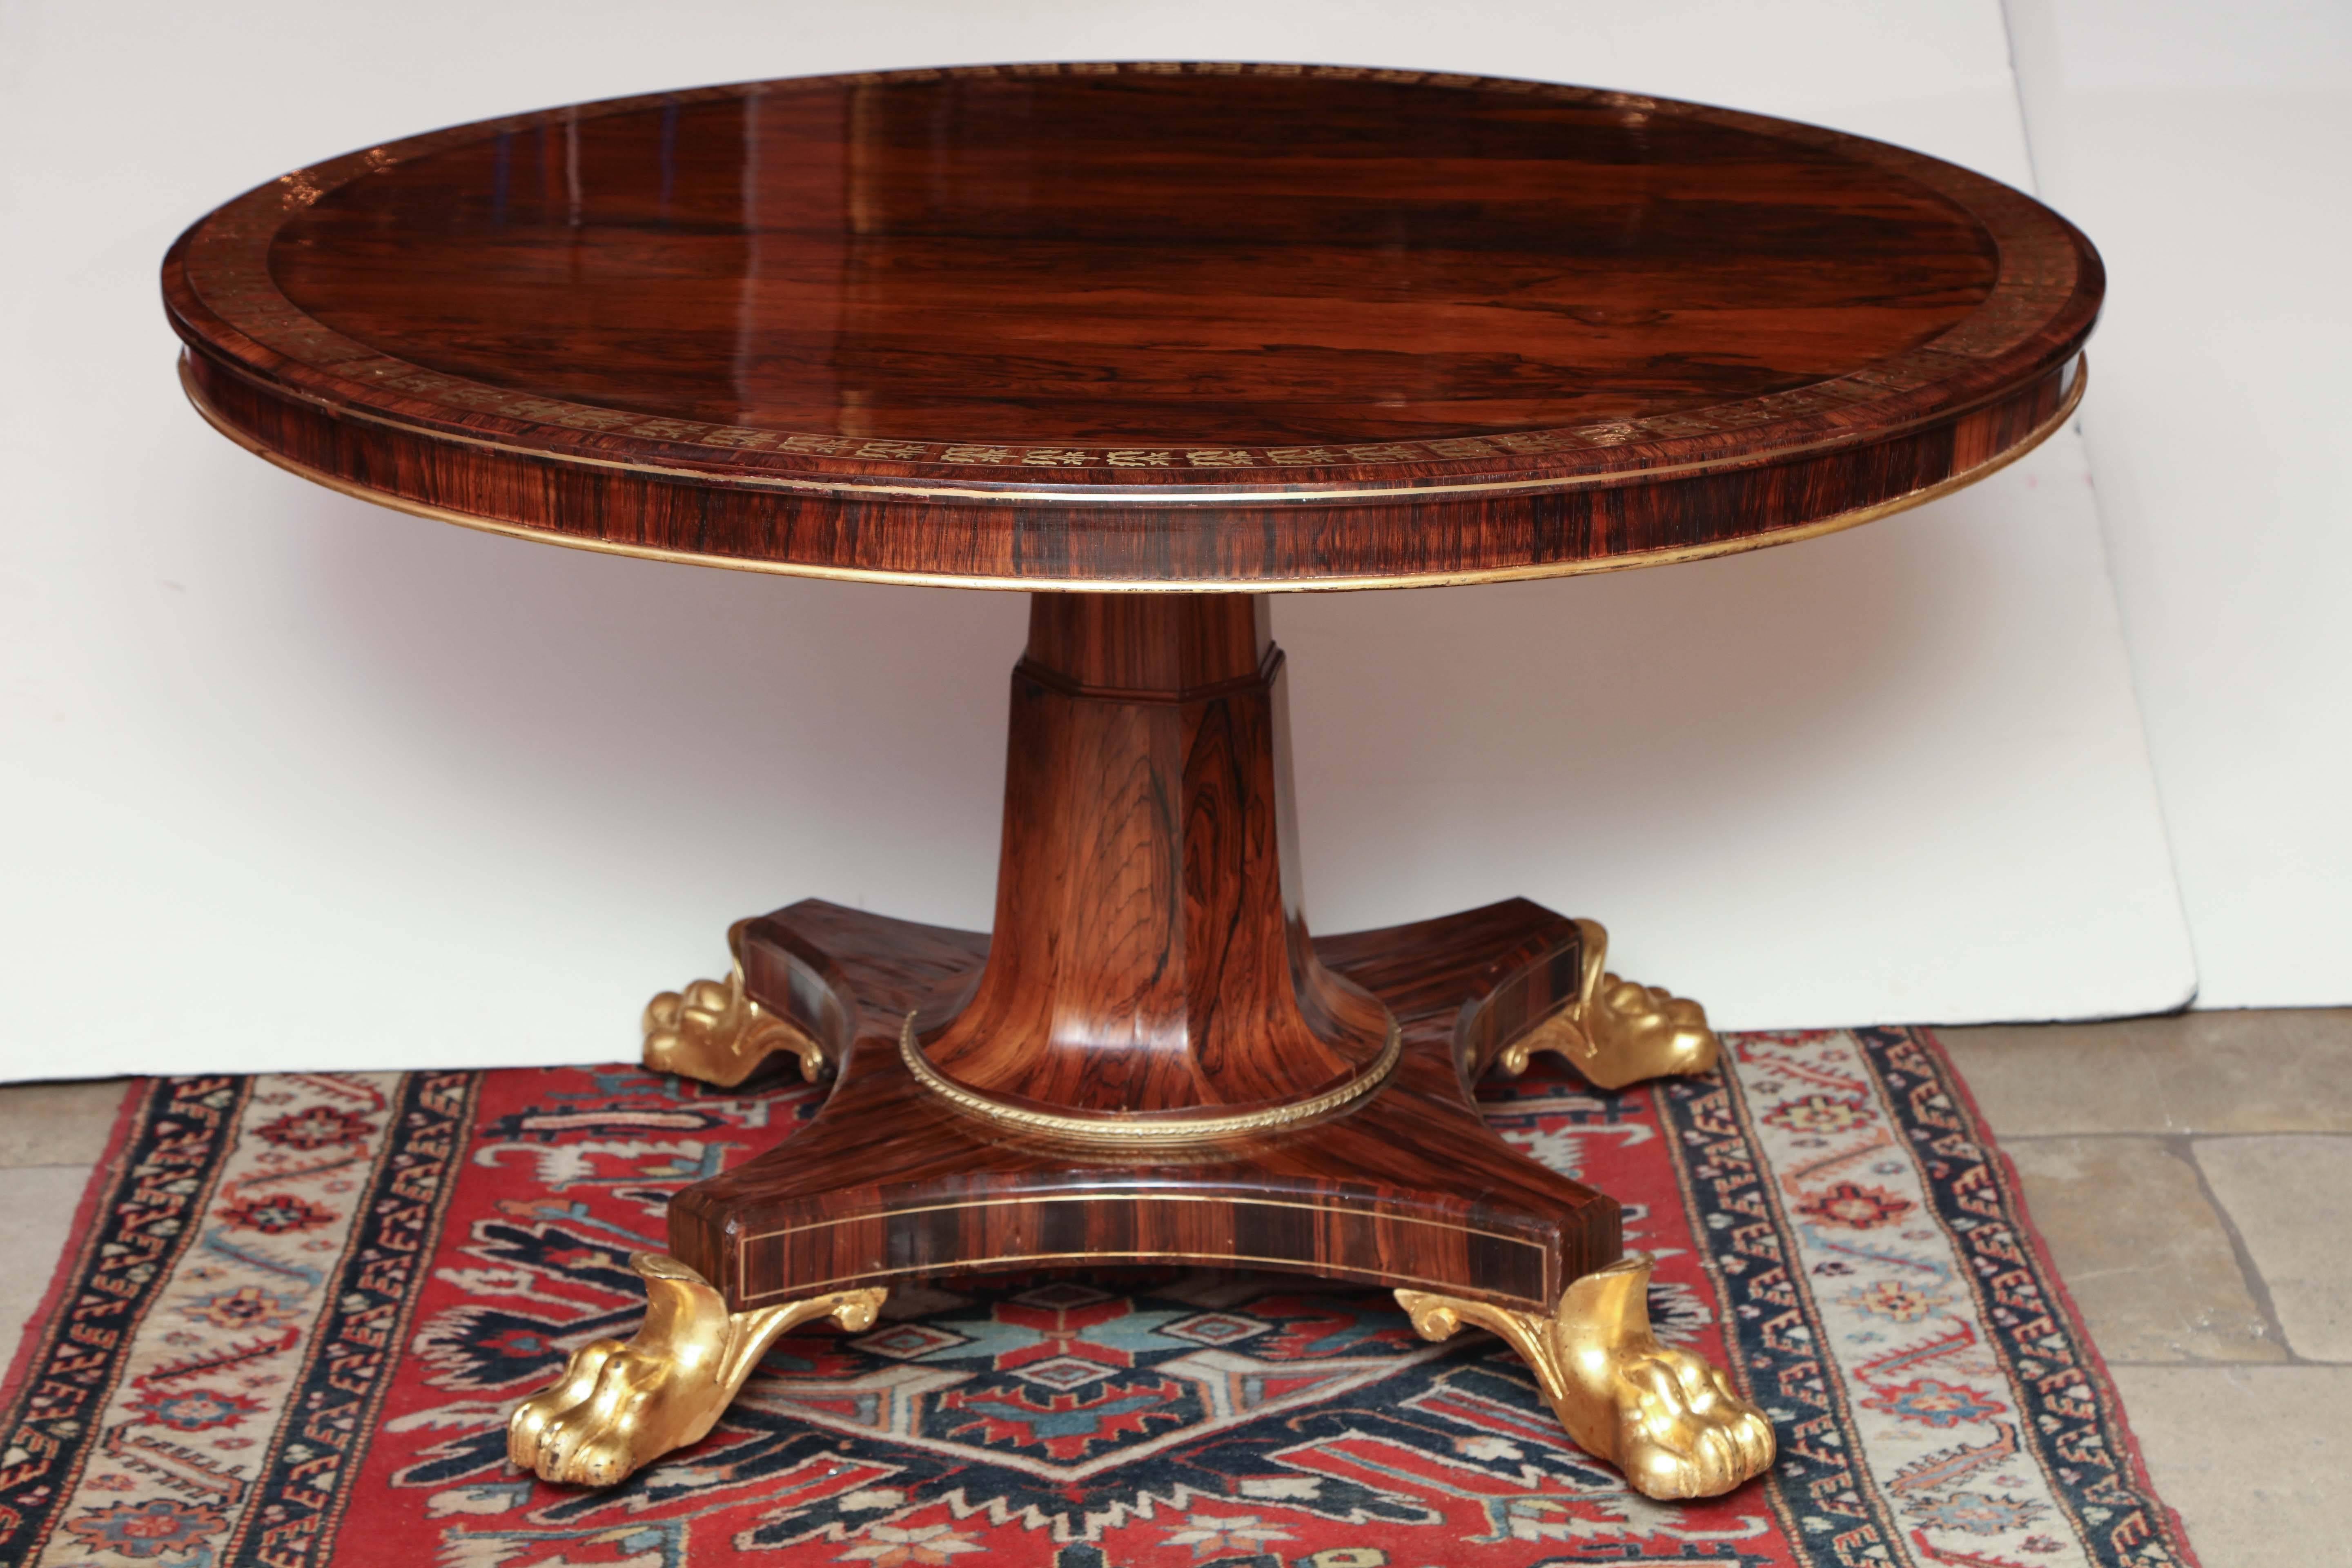 A fine Regency brass inlaid rosewood tilt top center table with rosewood pedestal base and carved lion paw feet.